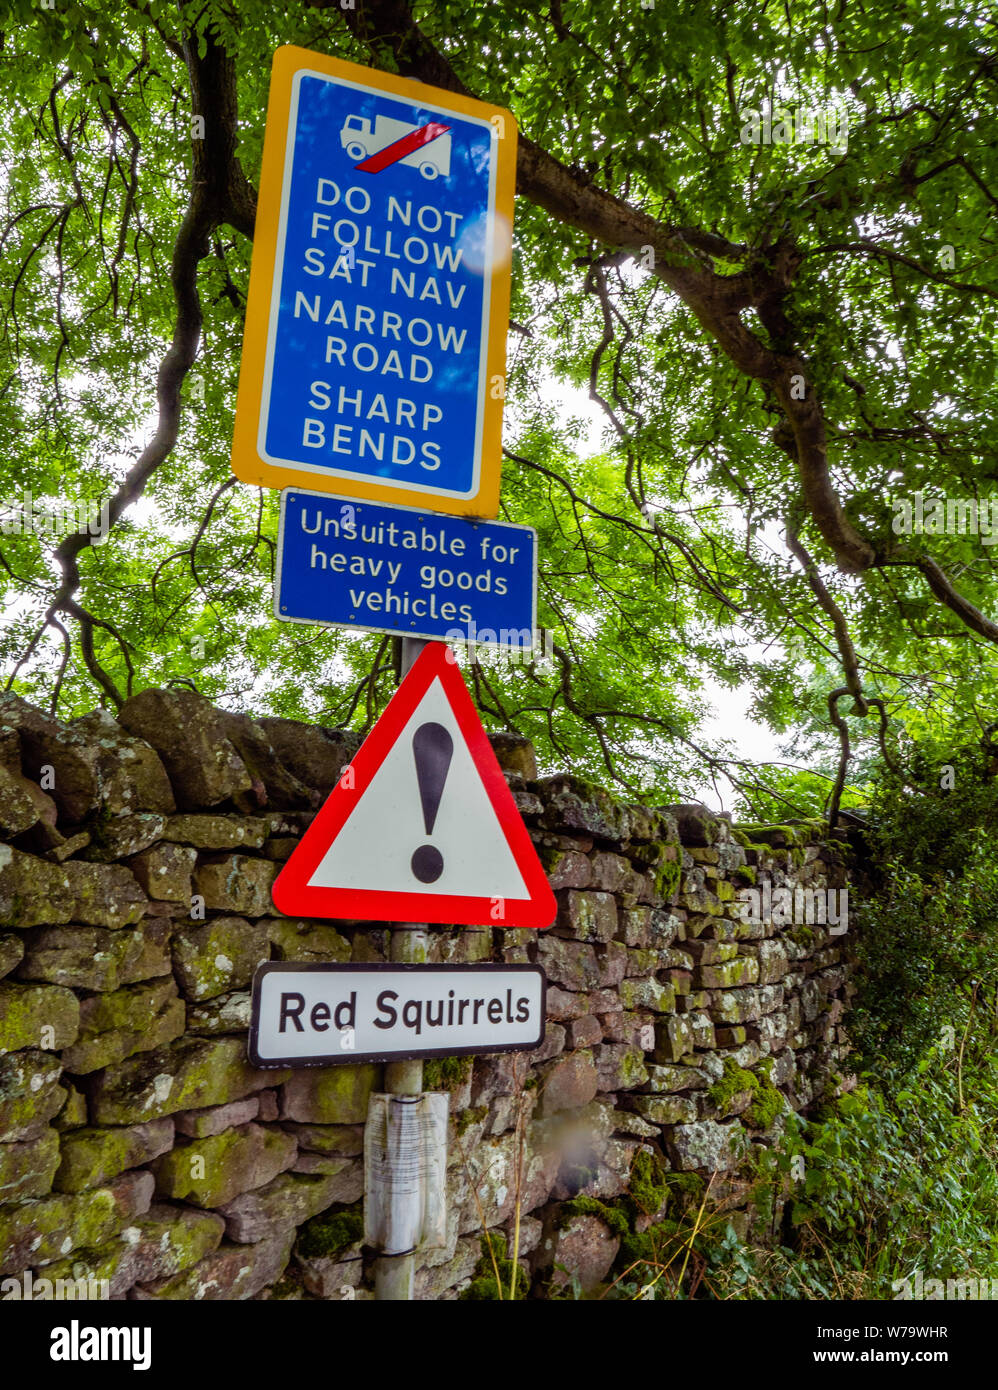 Entrance to a country lane in Cumbria UK warning caution about red squirrels and against sat nav use for heavy lorries Stock Photo